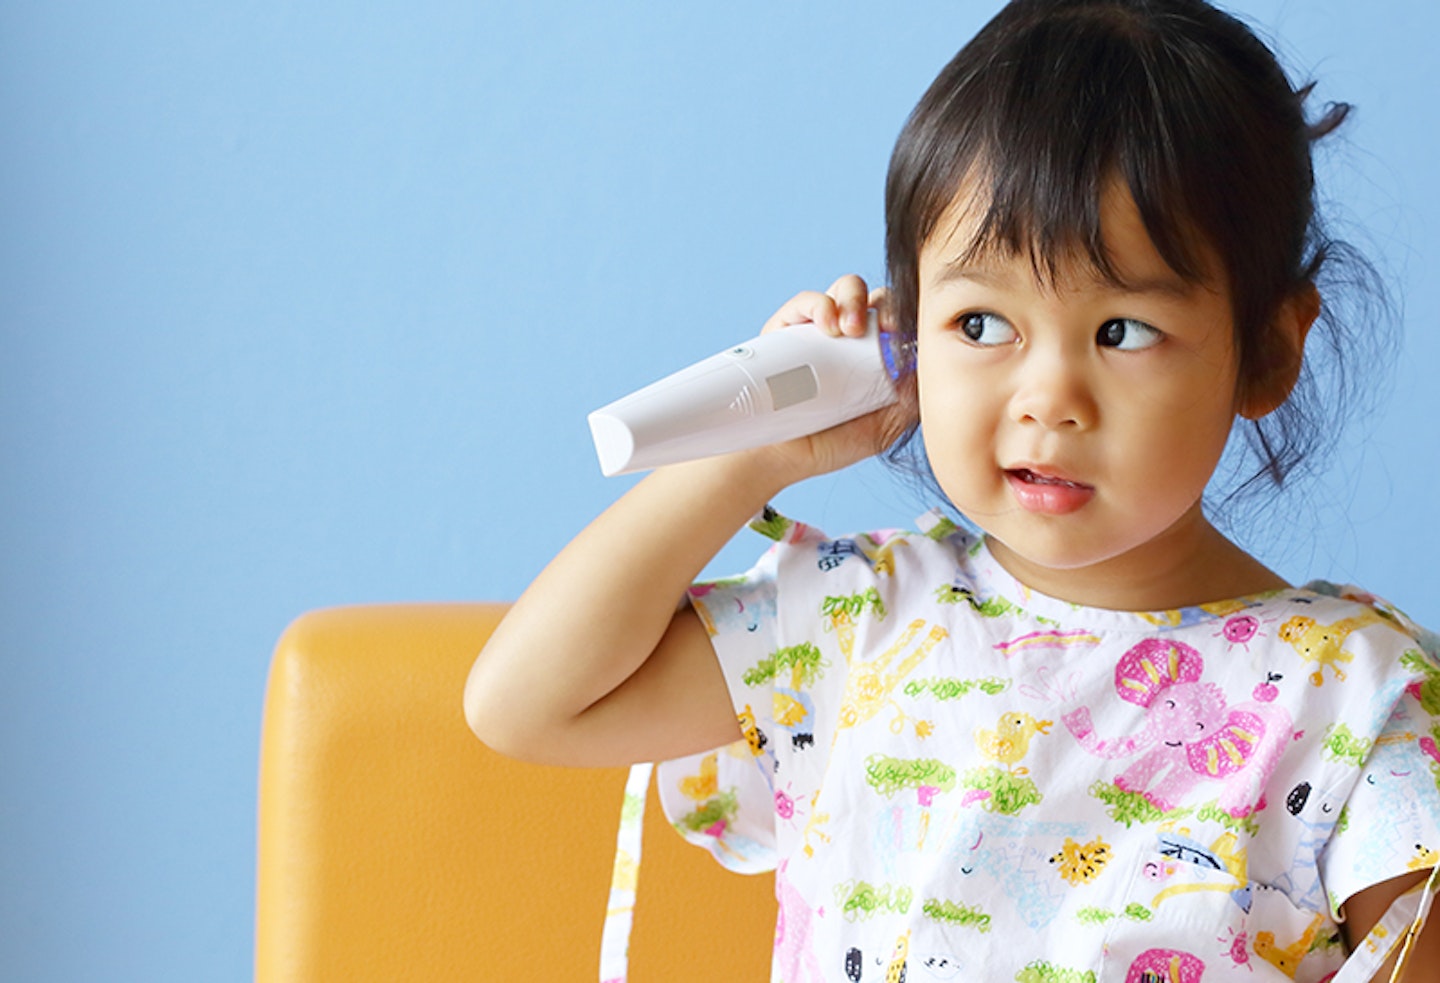 15 tips for looking after your toddler when they’re poorly